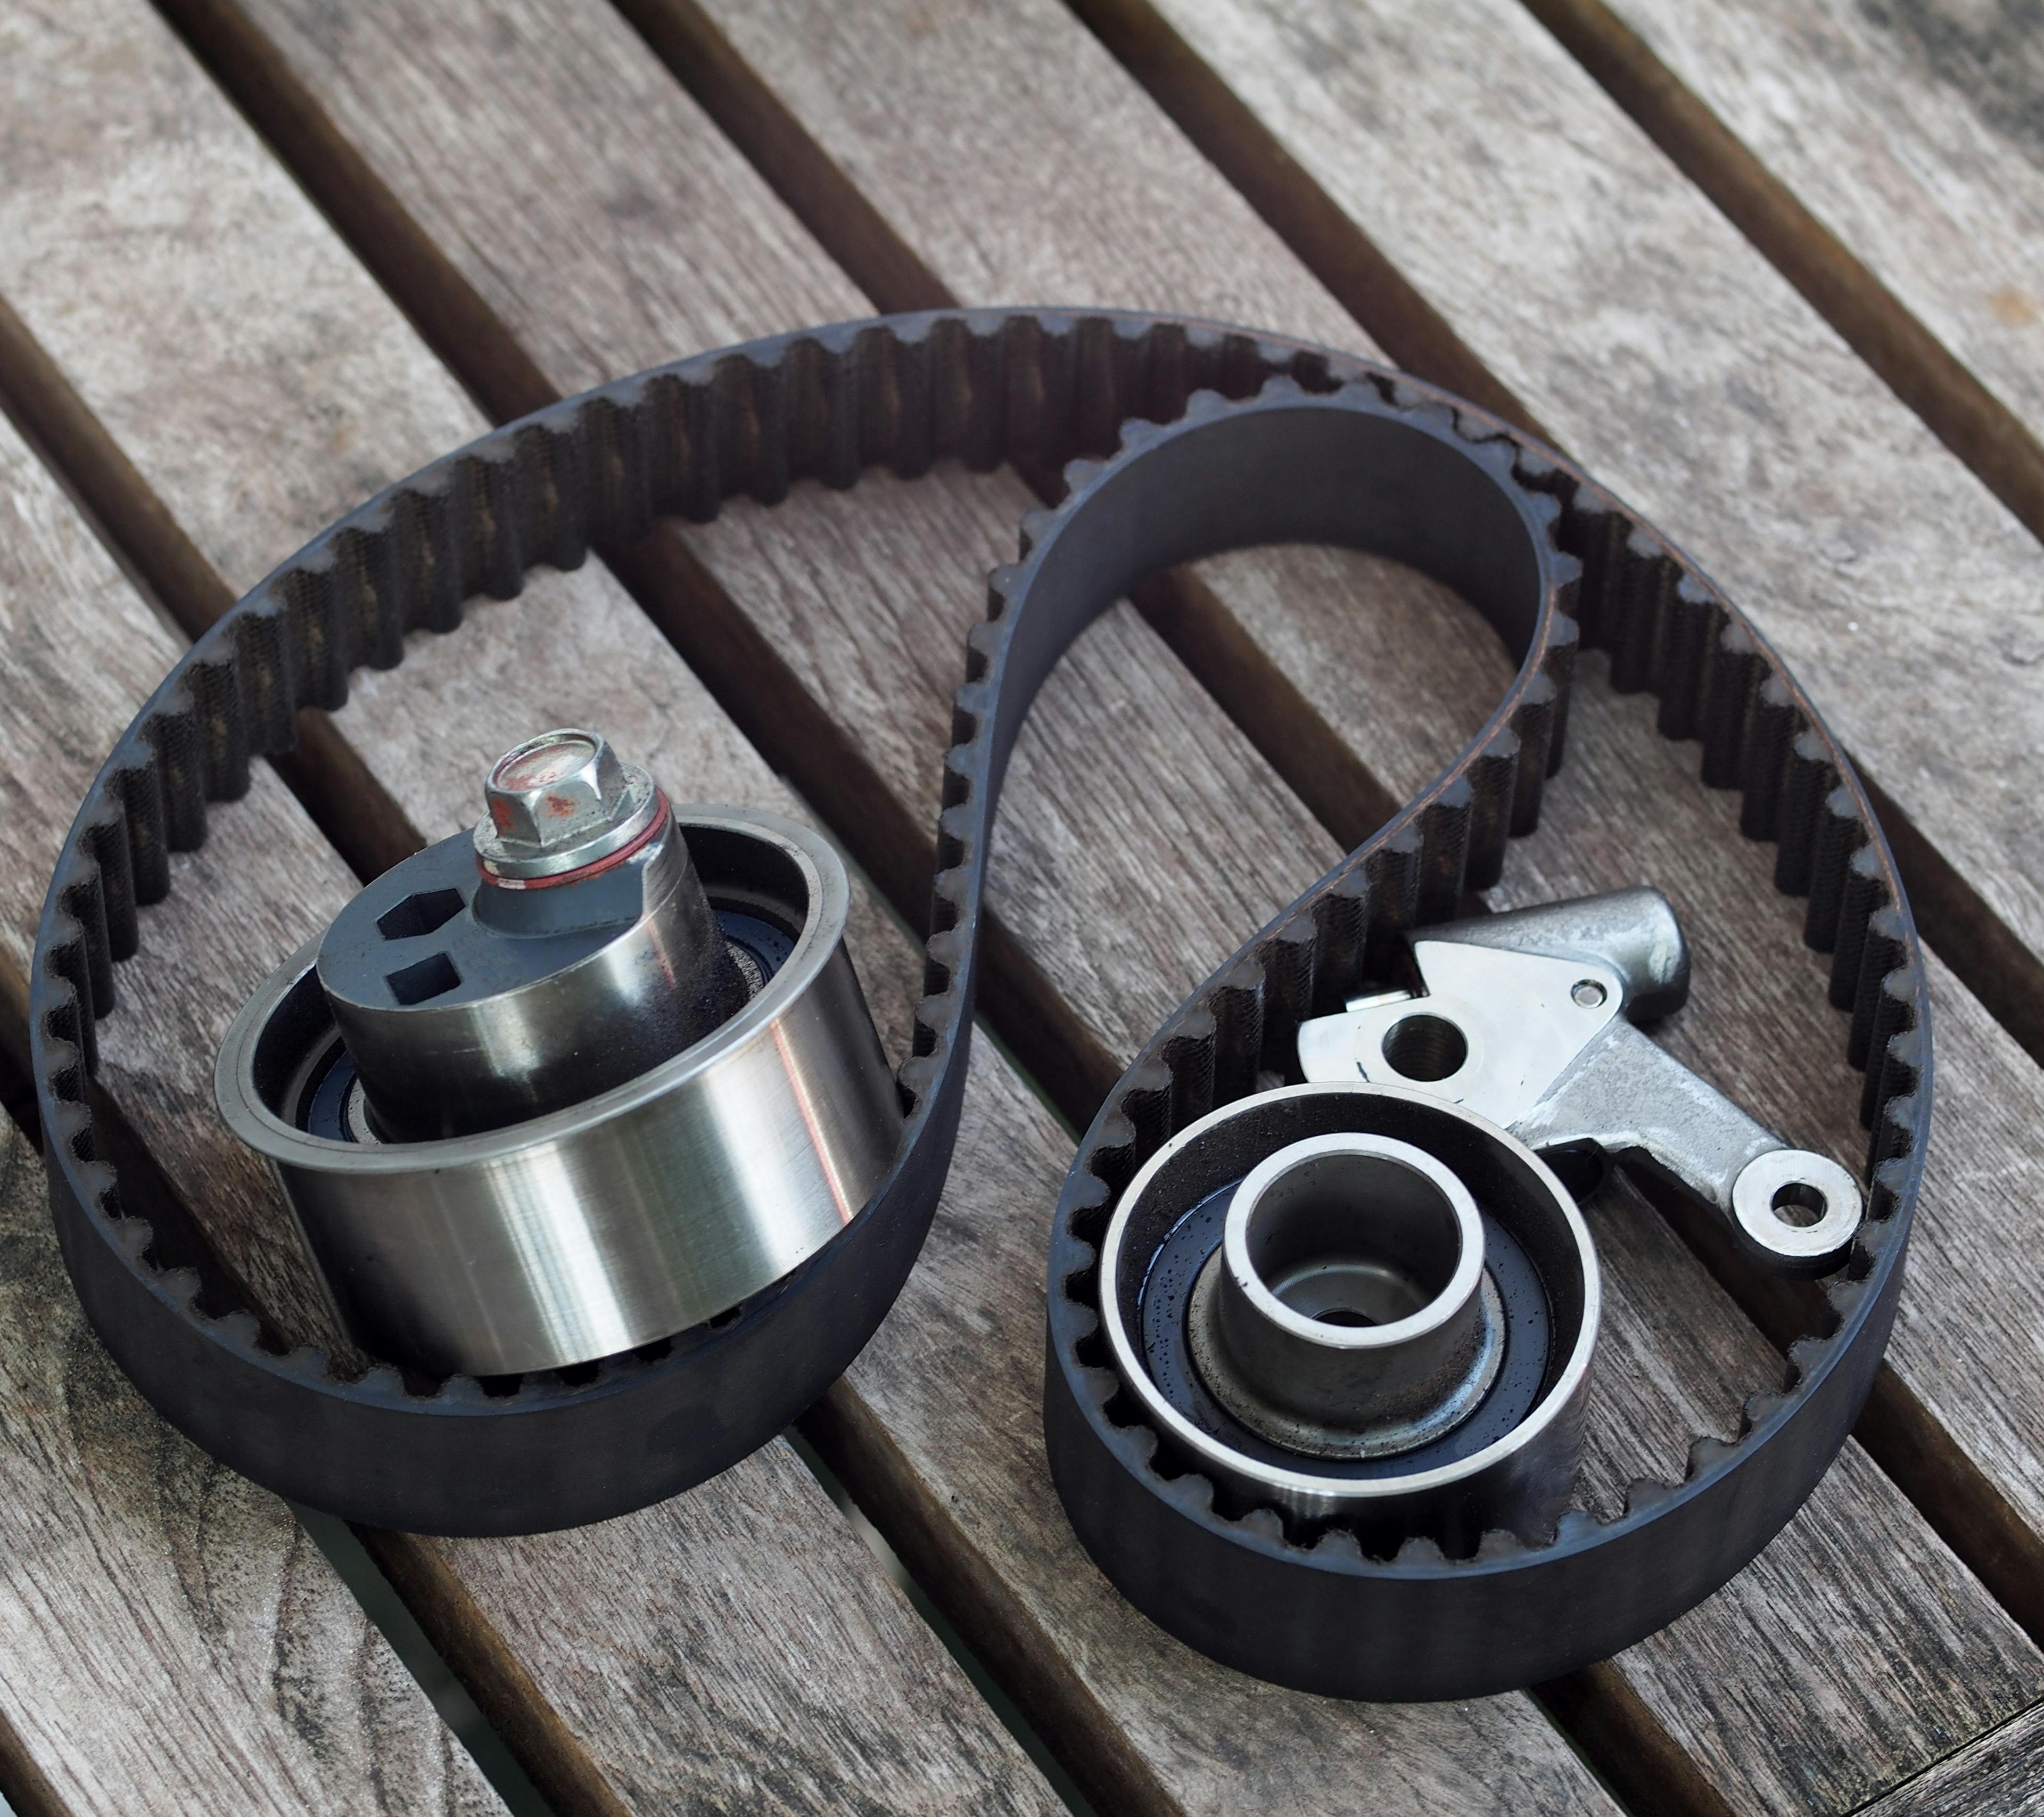 A timing belt, tensioner and idler pulley sitting on a wooden surface